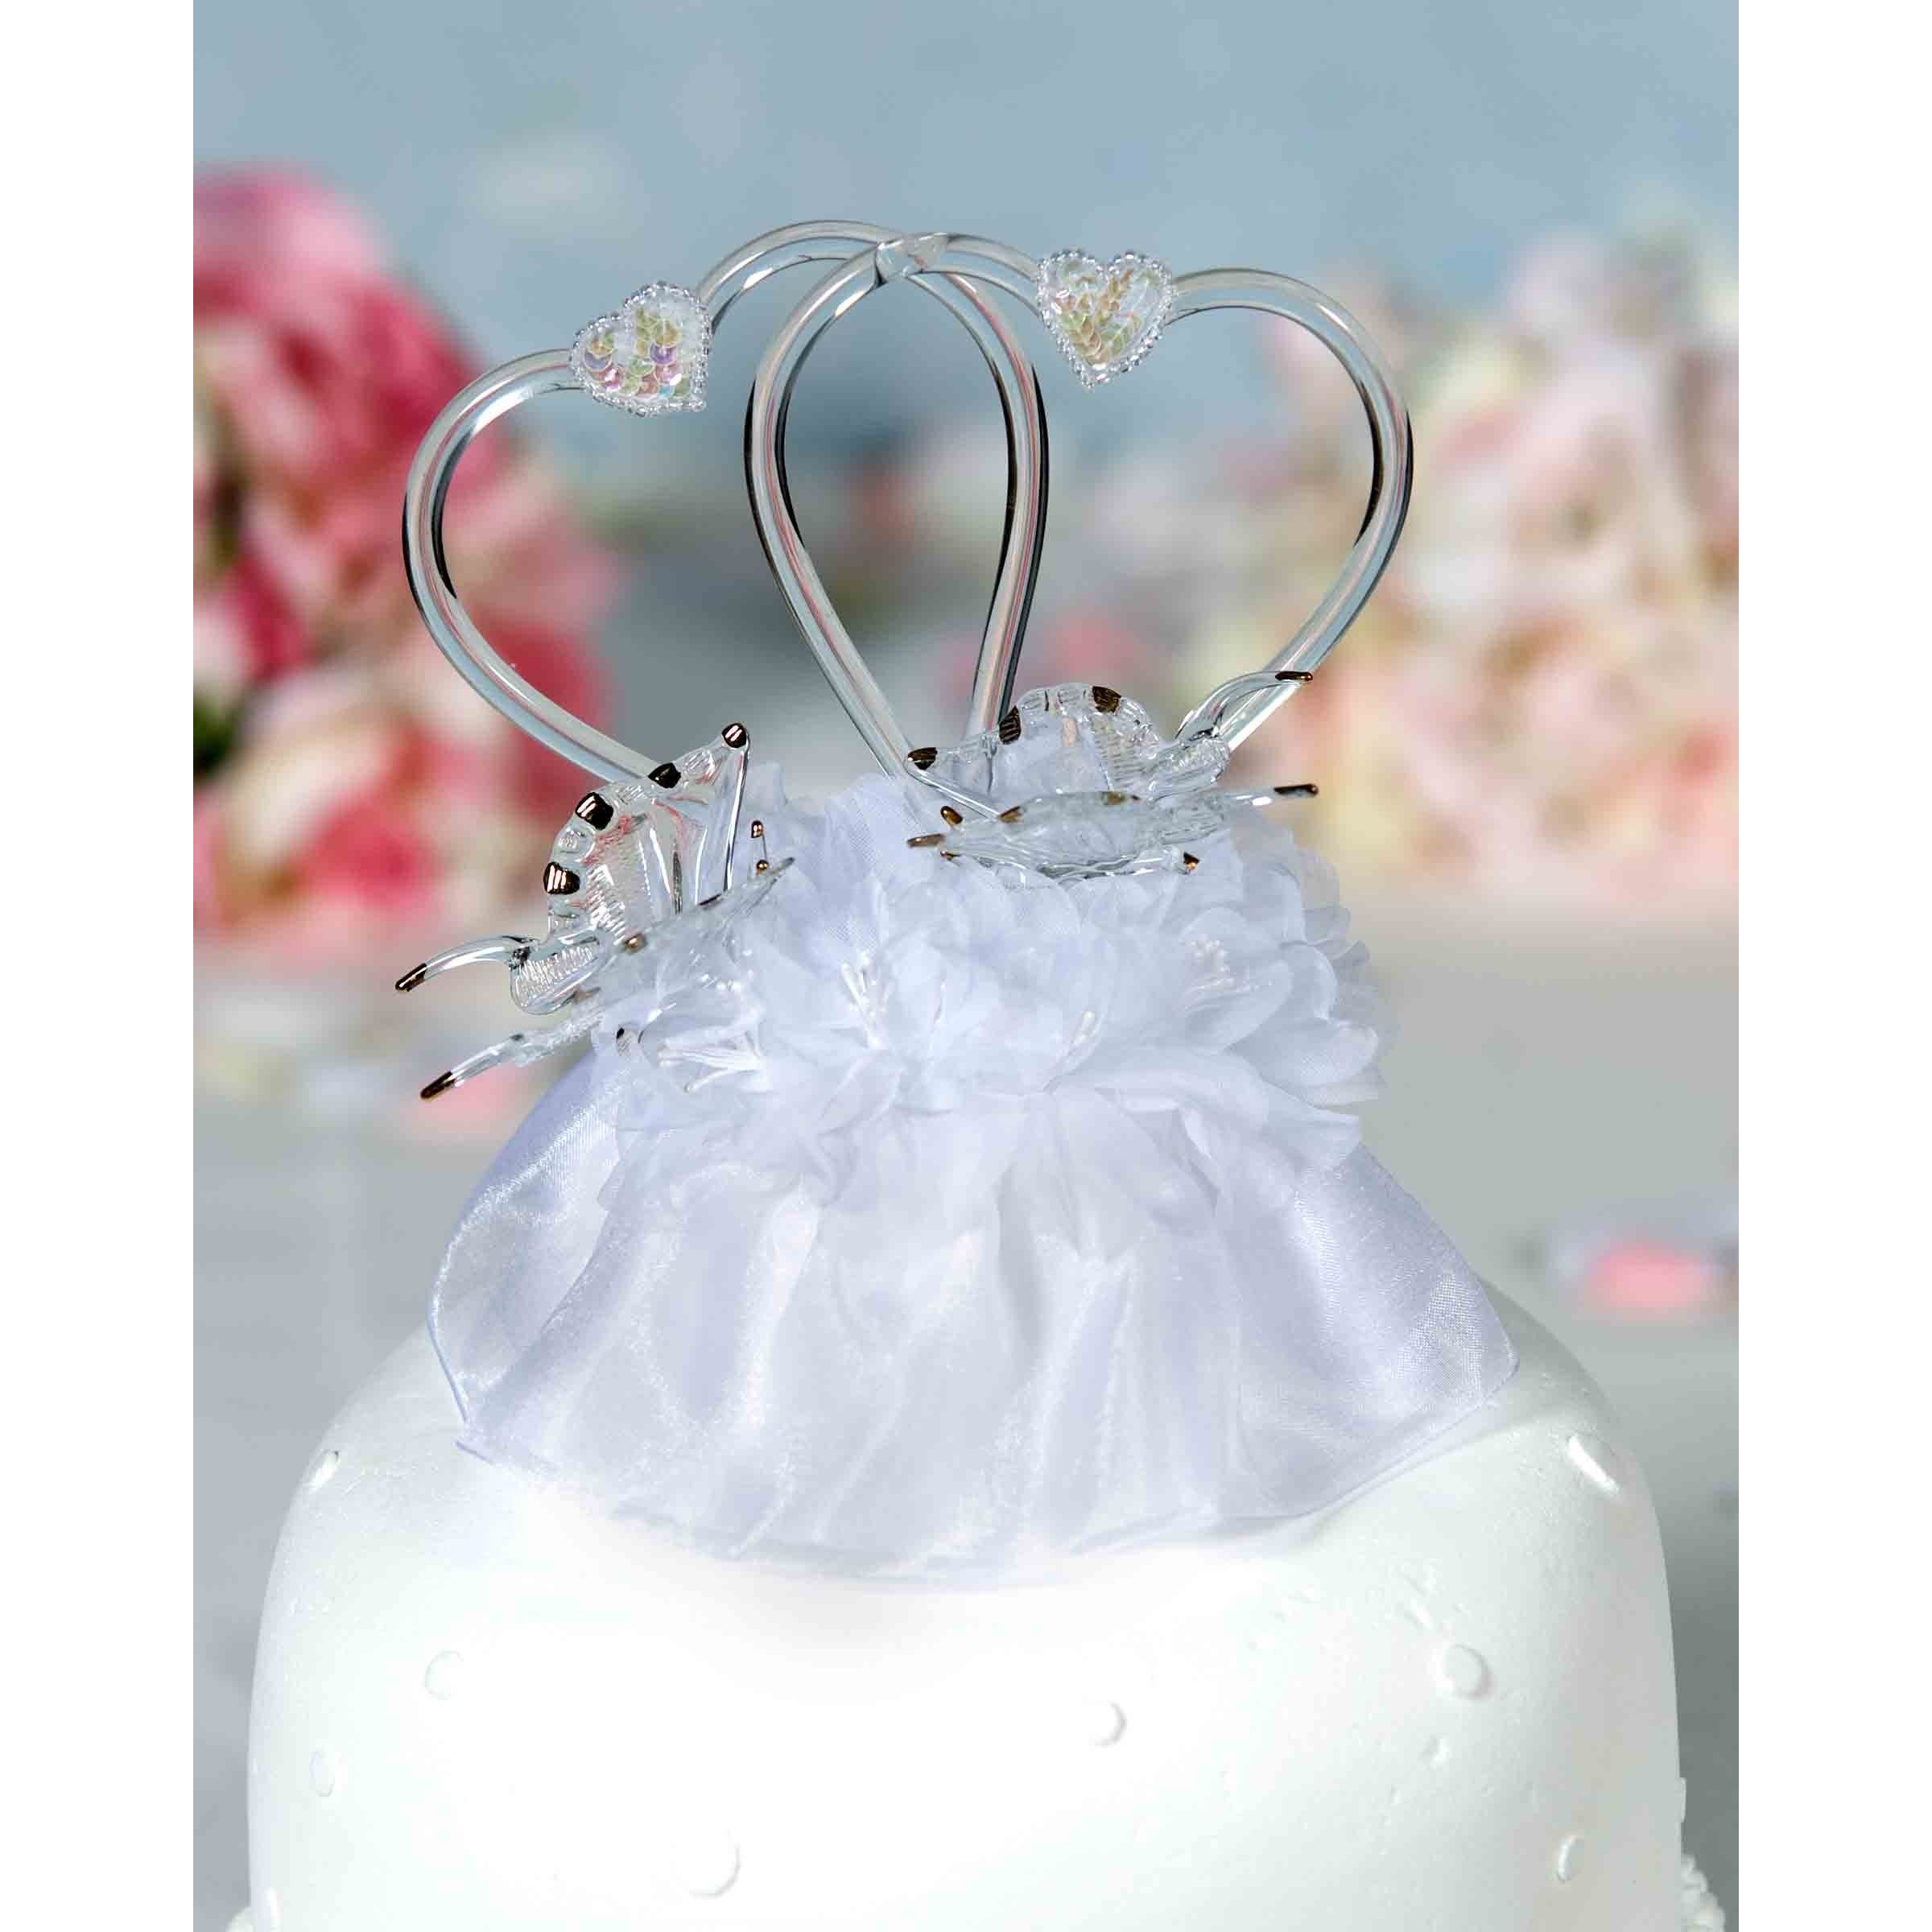 Butterfly Wedding Cake Toppers, Butterfly Decorations Cake